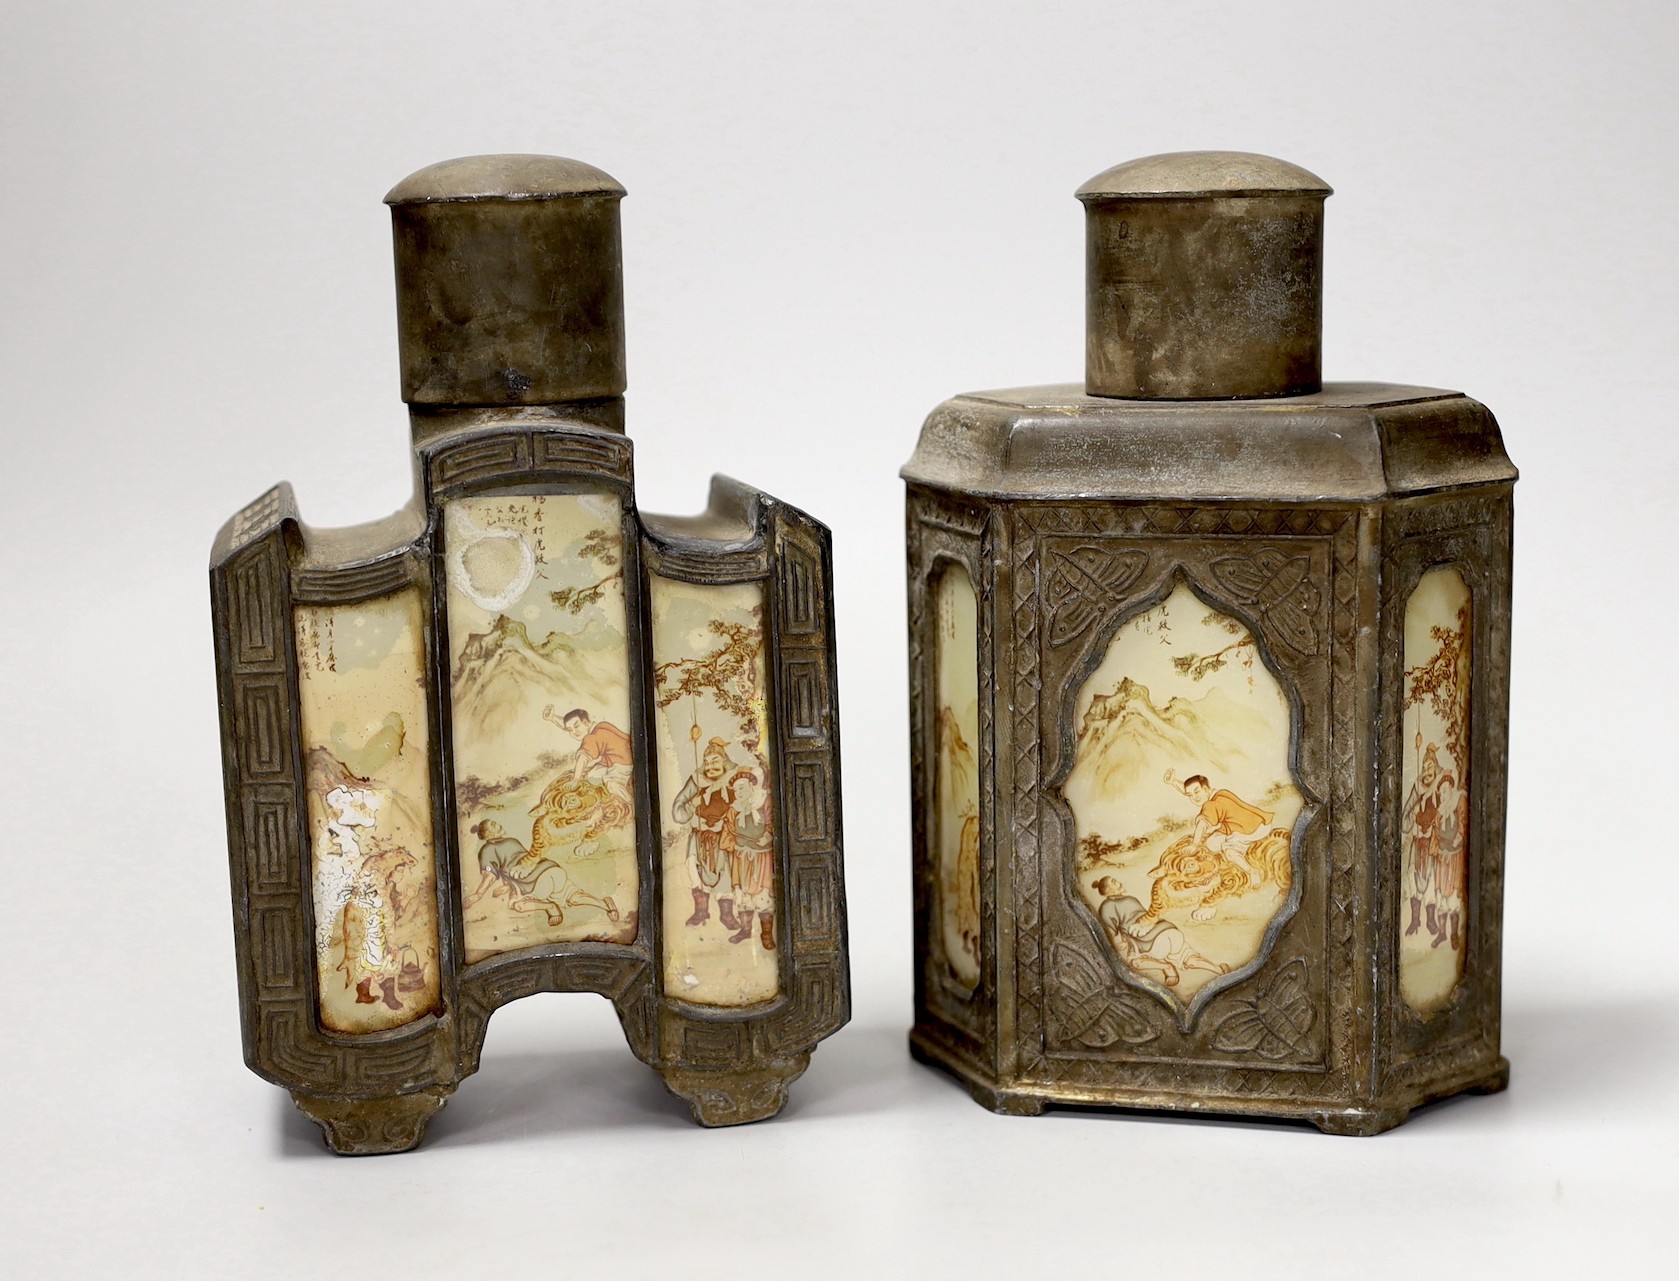 Two Chinese pewter tea caddies with glass panelled decoration. 18cm high                                                                                                                                                    